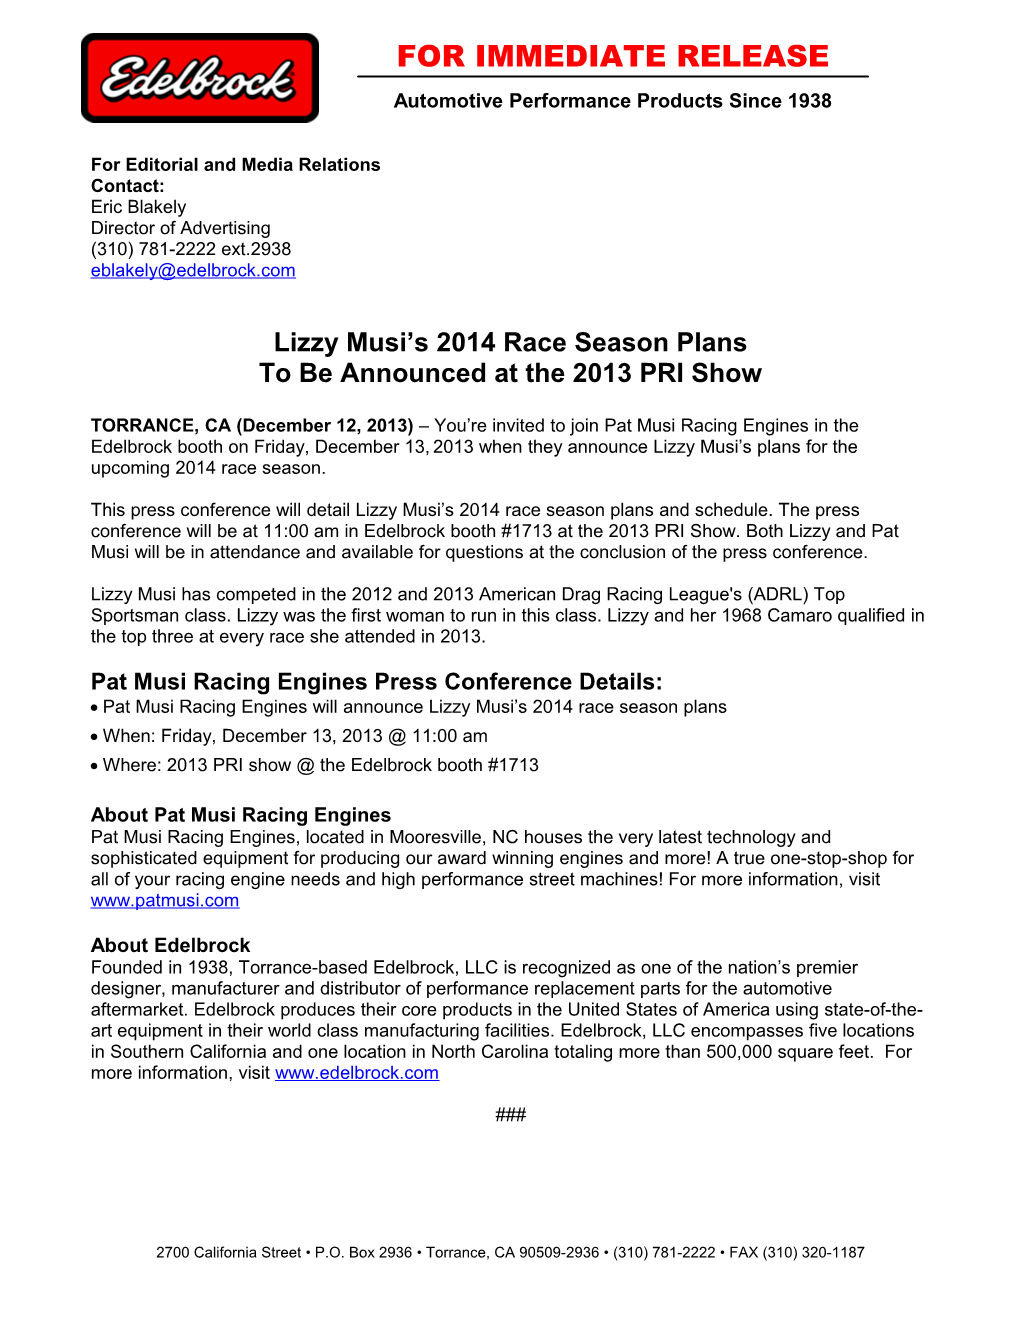 Lizzy Musi S 2014 Race Season Plans to Be Announced at the 2013 PRI Show